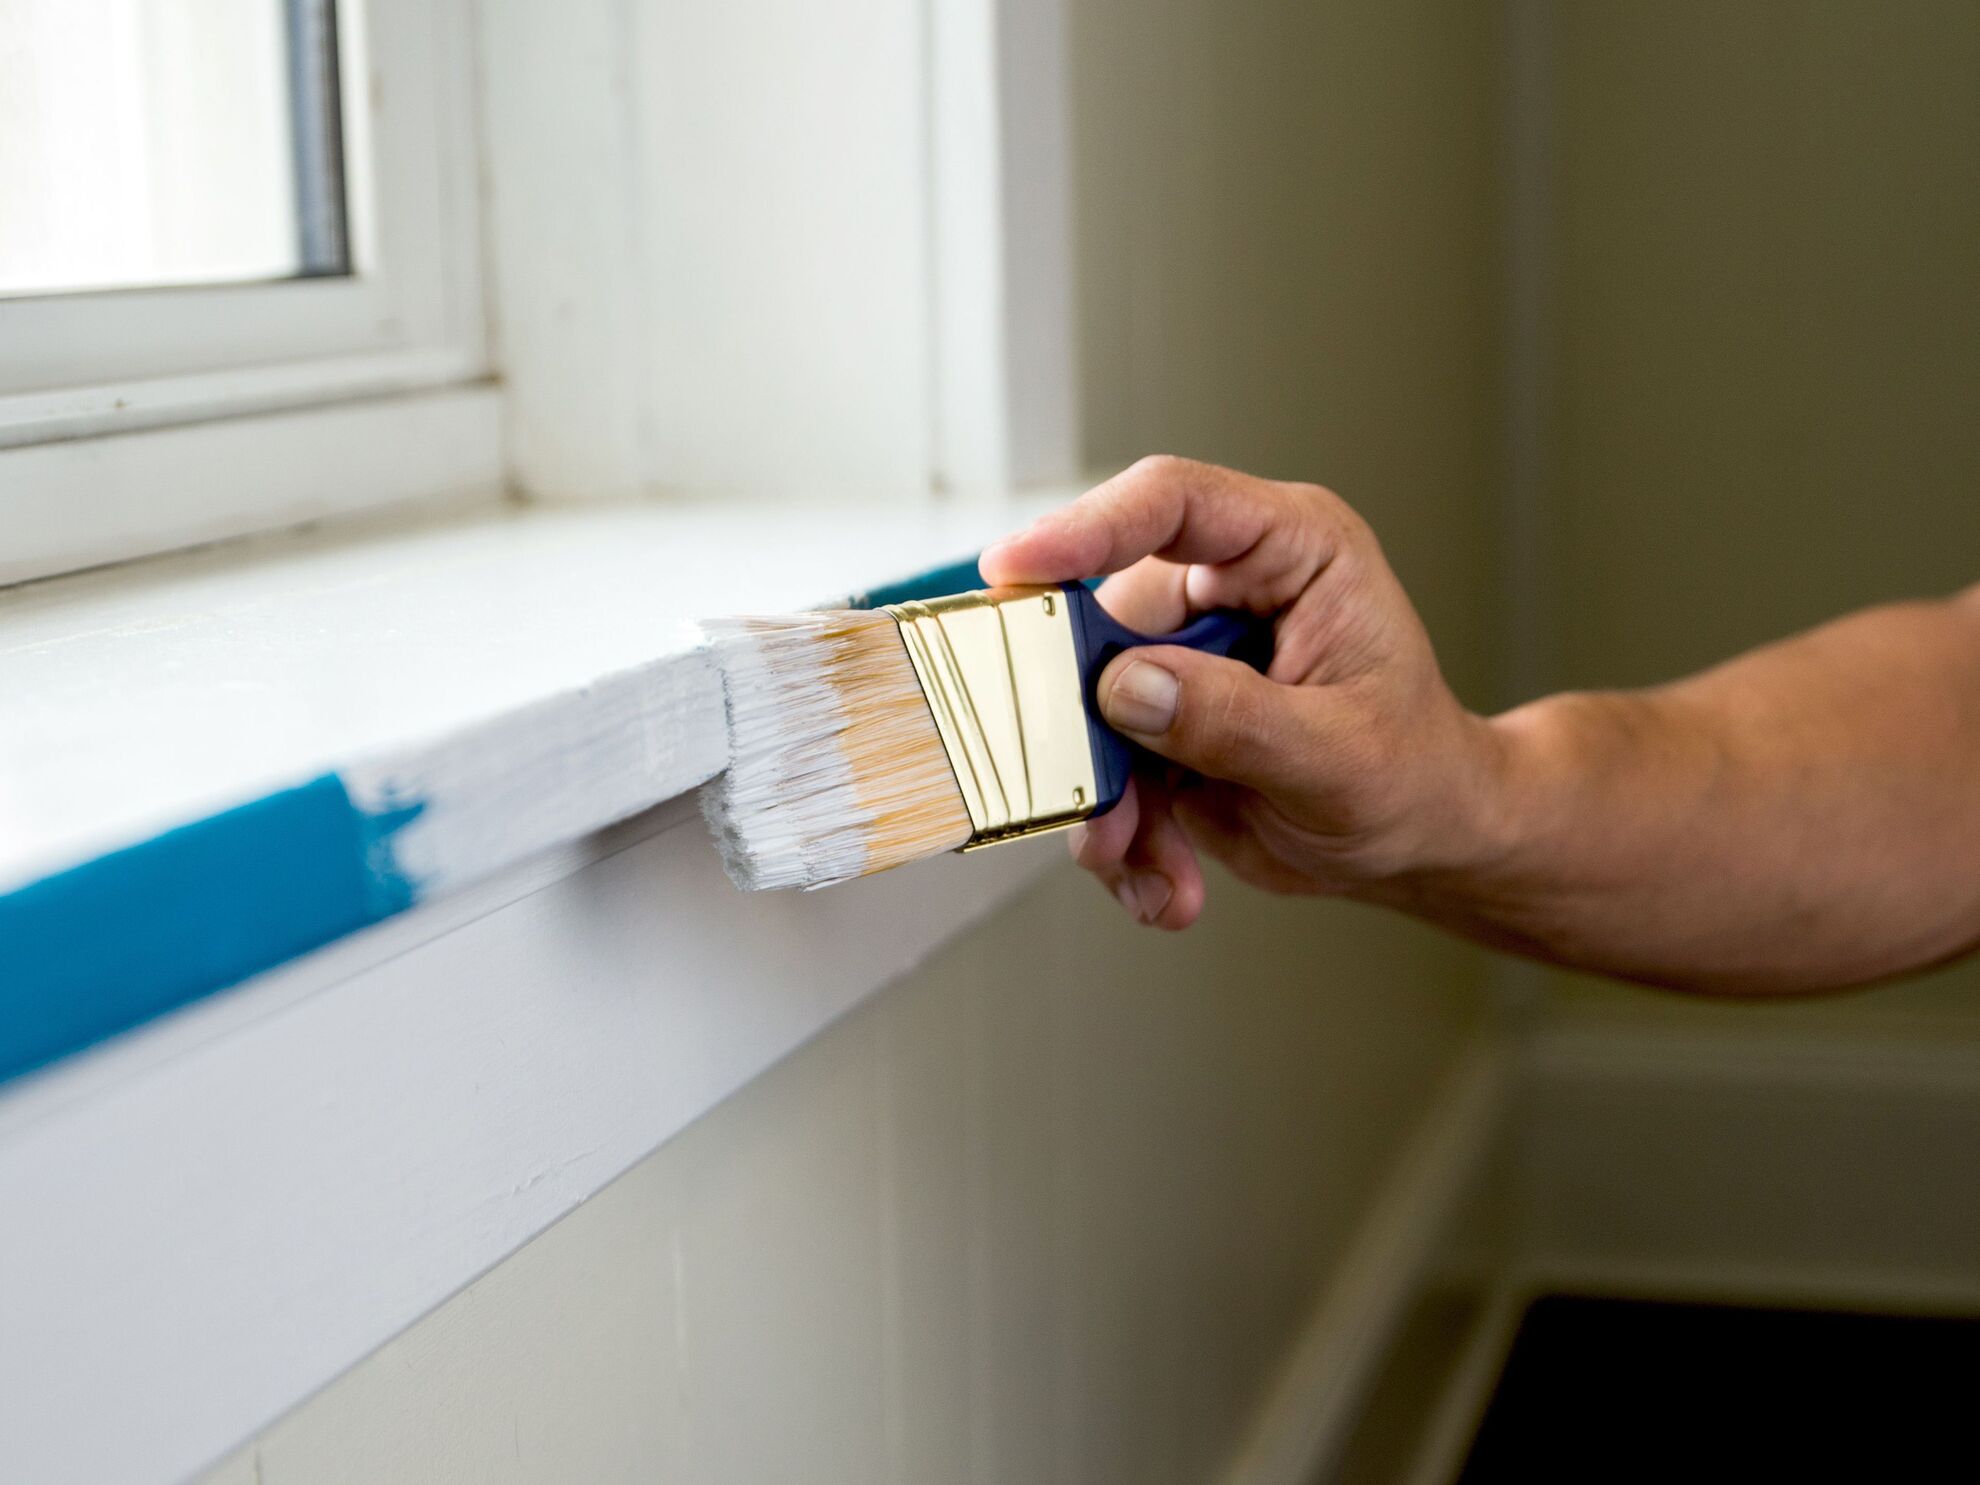 The Best Paint Finishes For Trim: How To Get A Professional Look